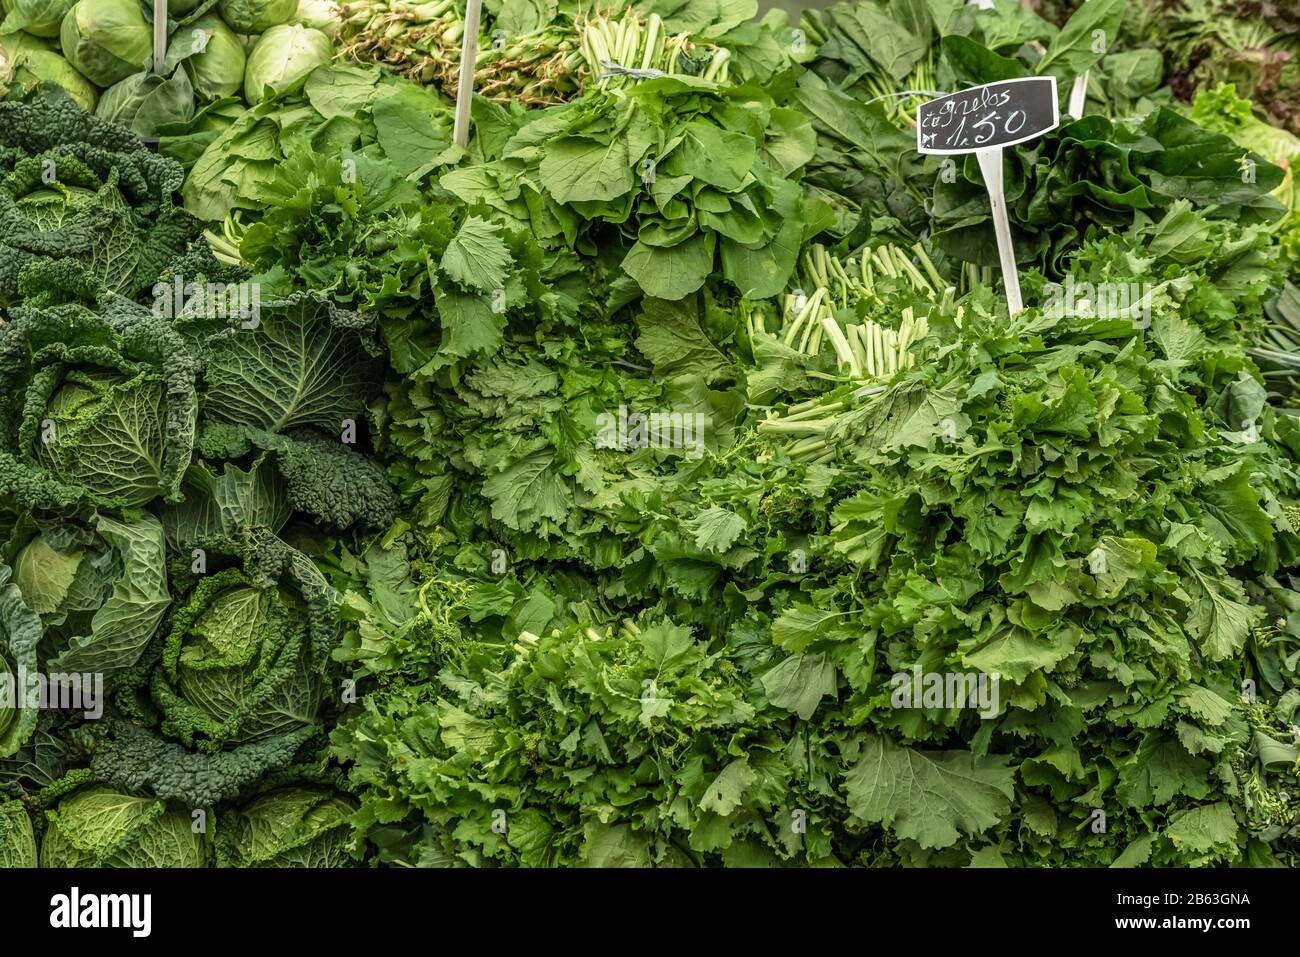 Variety of green vegetables on display with prices on a market stall at the fruit and vegetable market in Cascais Portugal Stock Photo